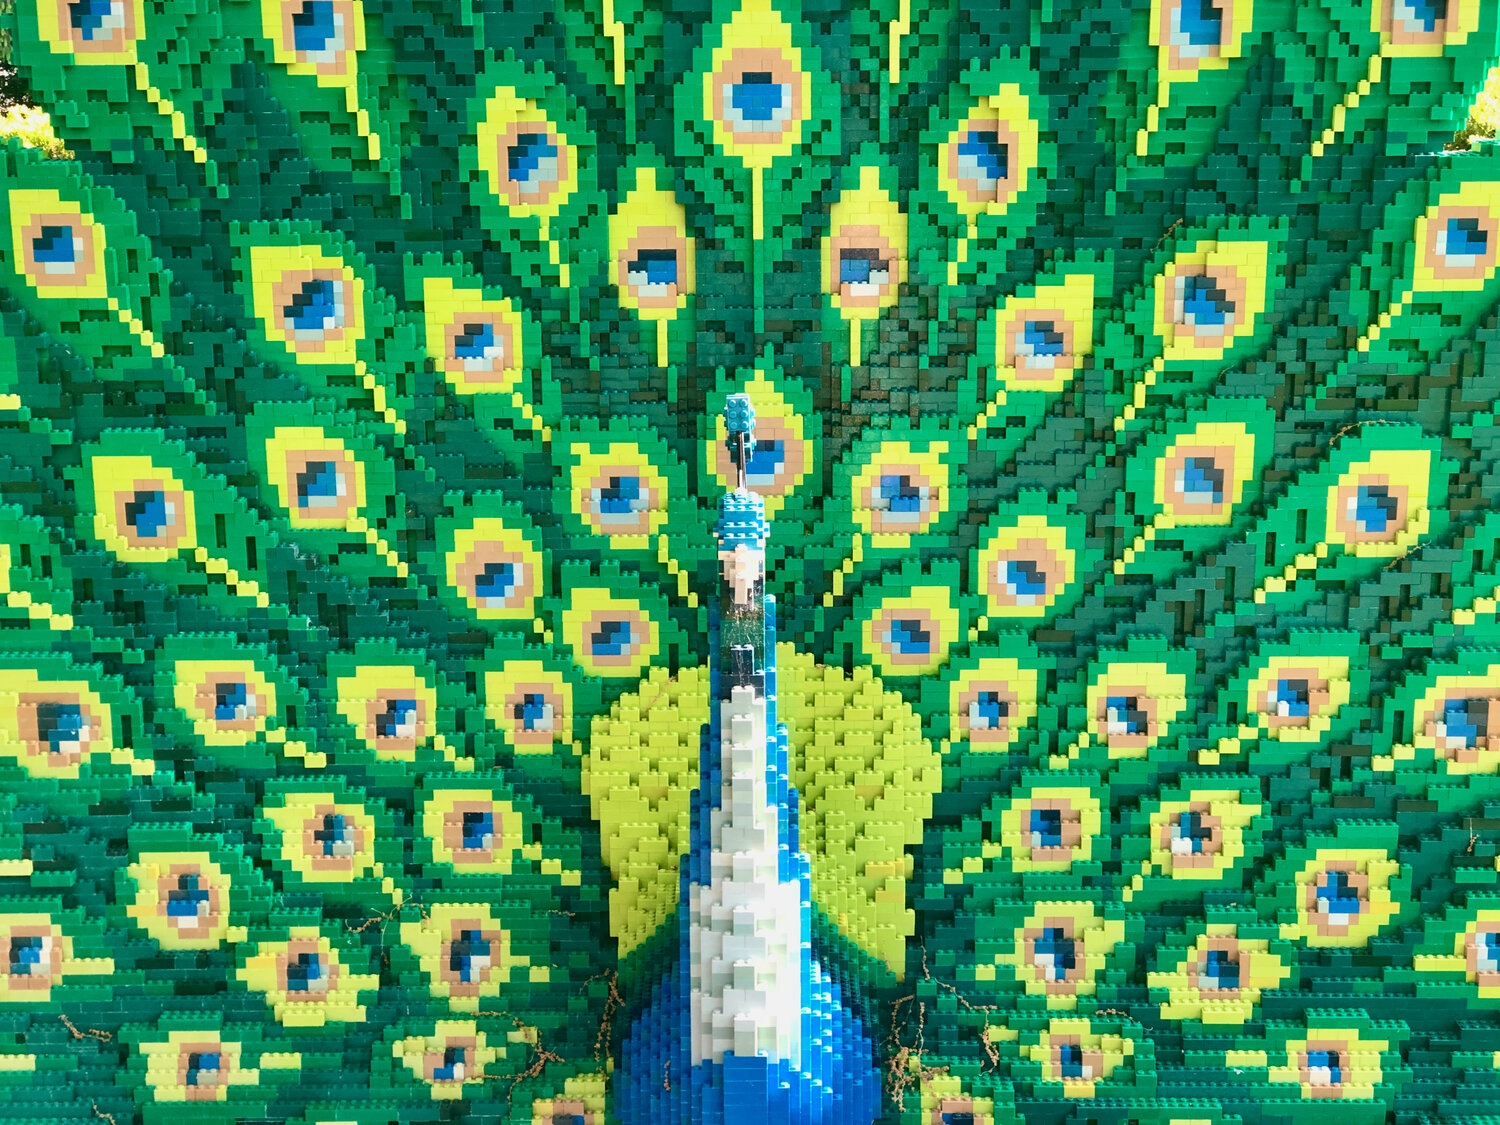 A detail of the peacock Lego exhibit.